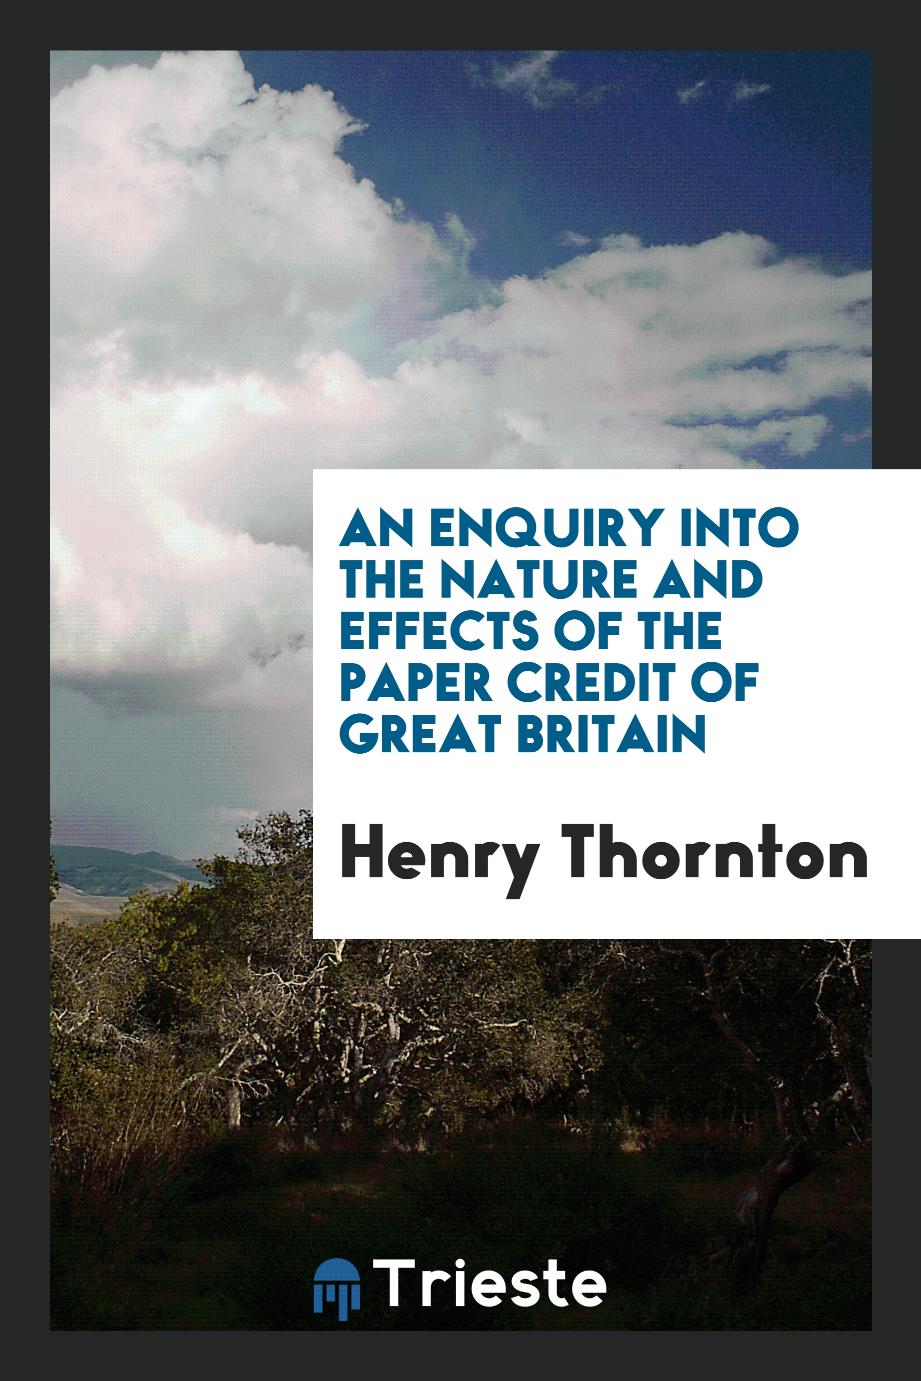 Henry Thornton - An Enquiry into the Nature and Effects of the Paper Credit of Great Britain